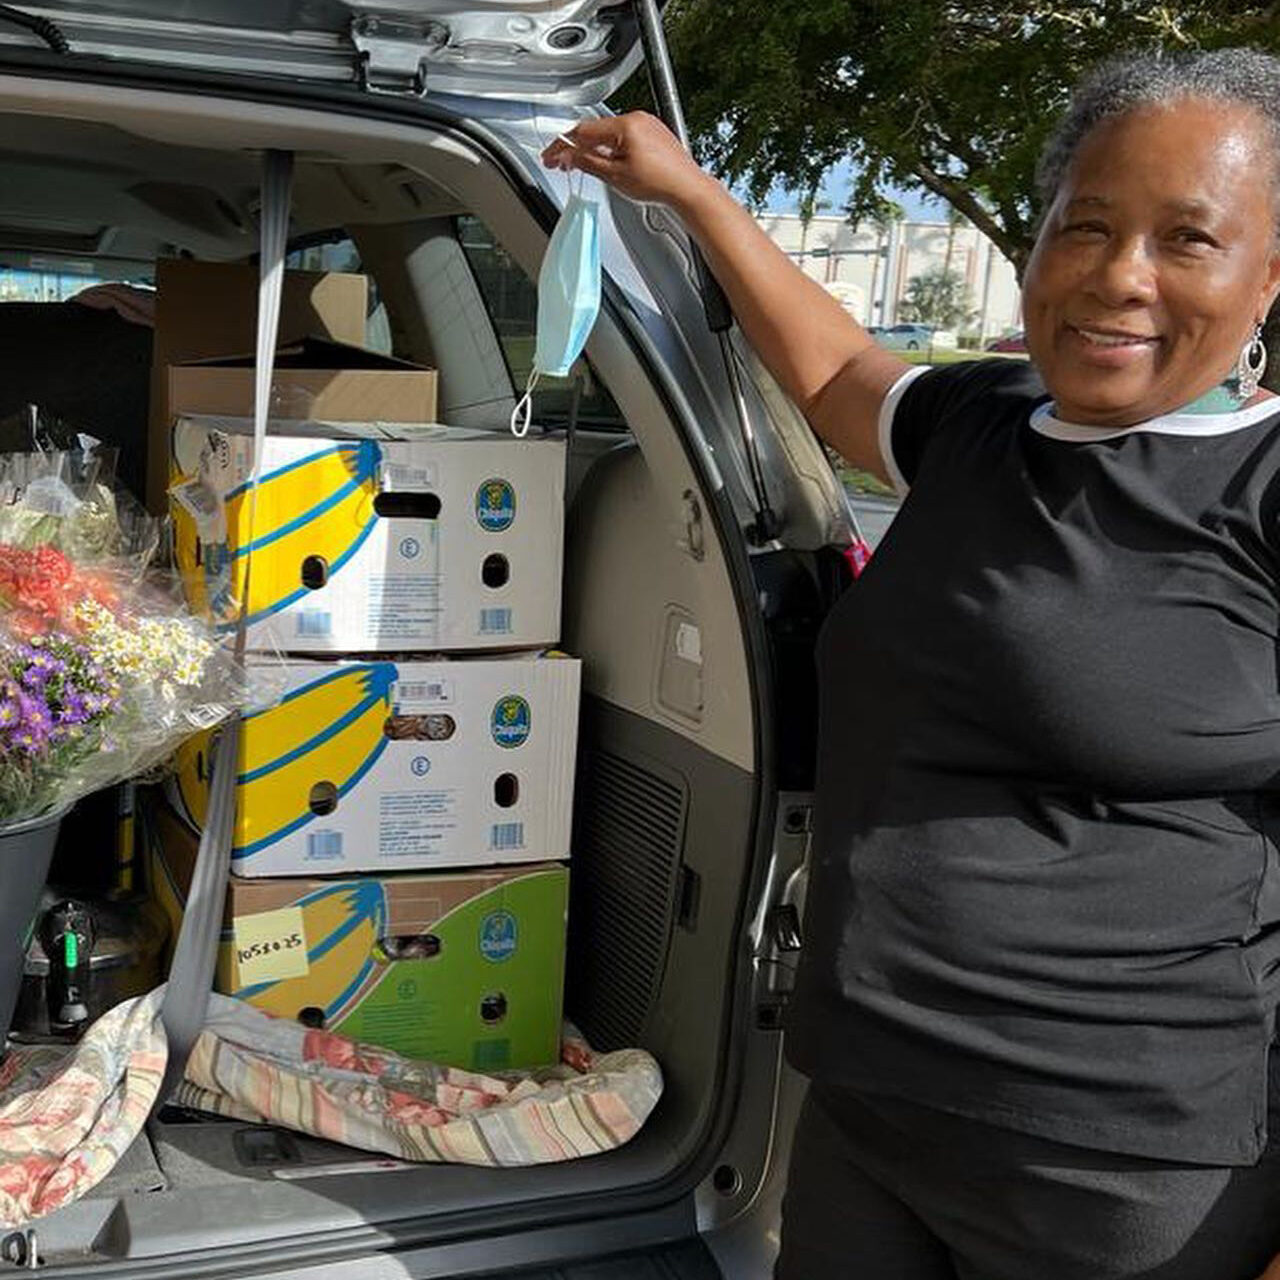 Southwest Florida volunteer with trunk full of food